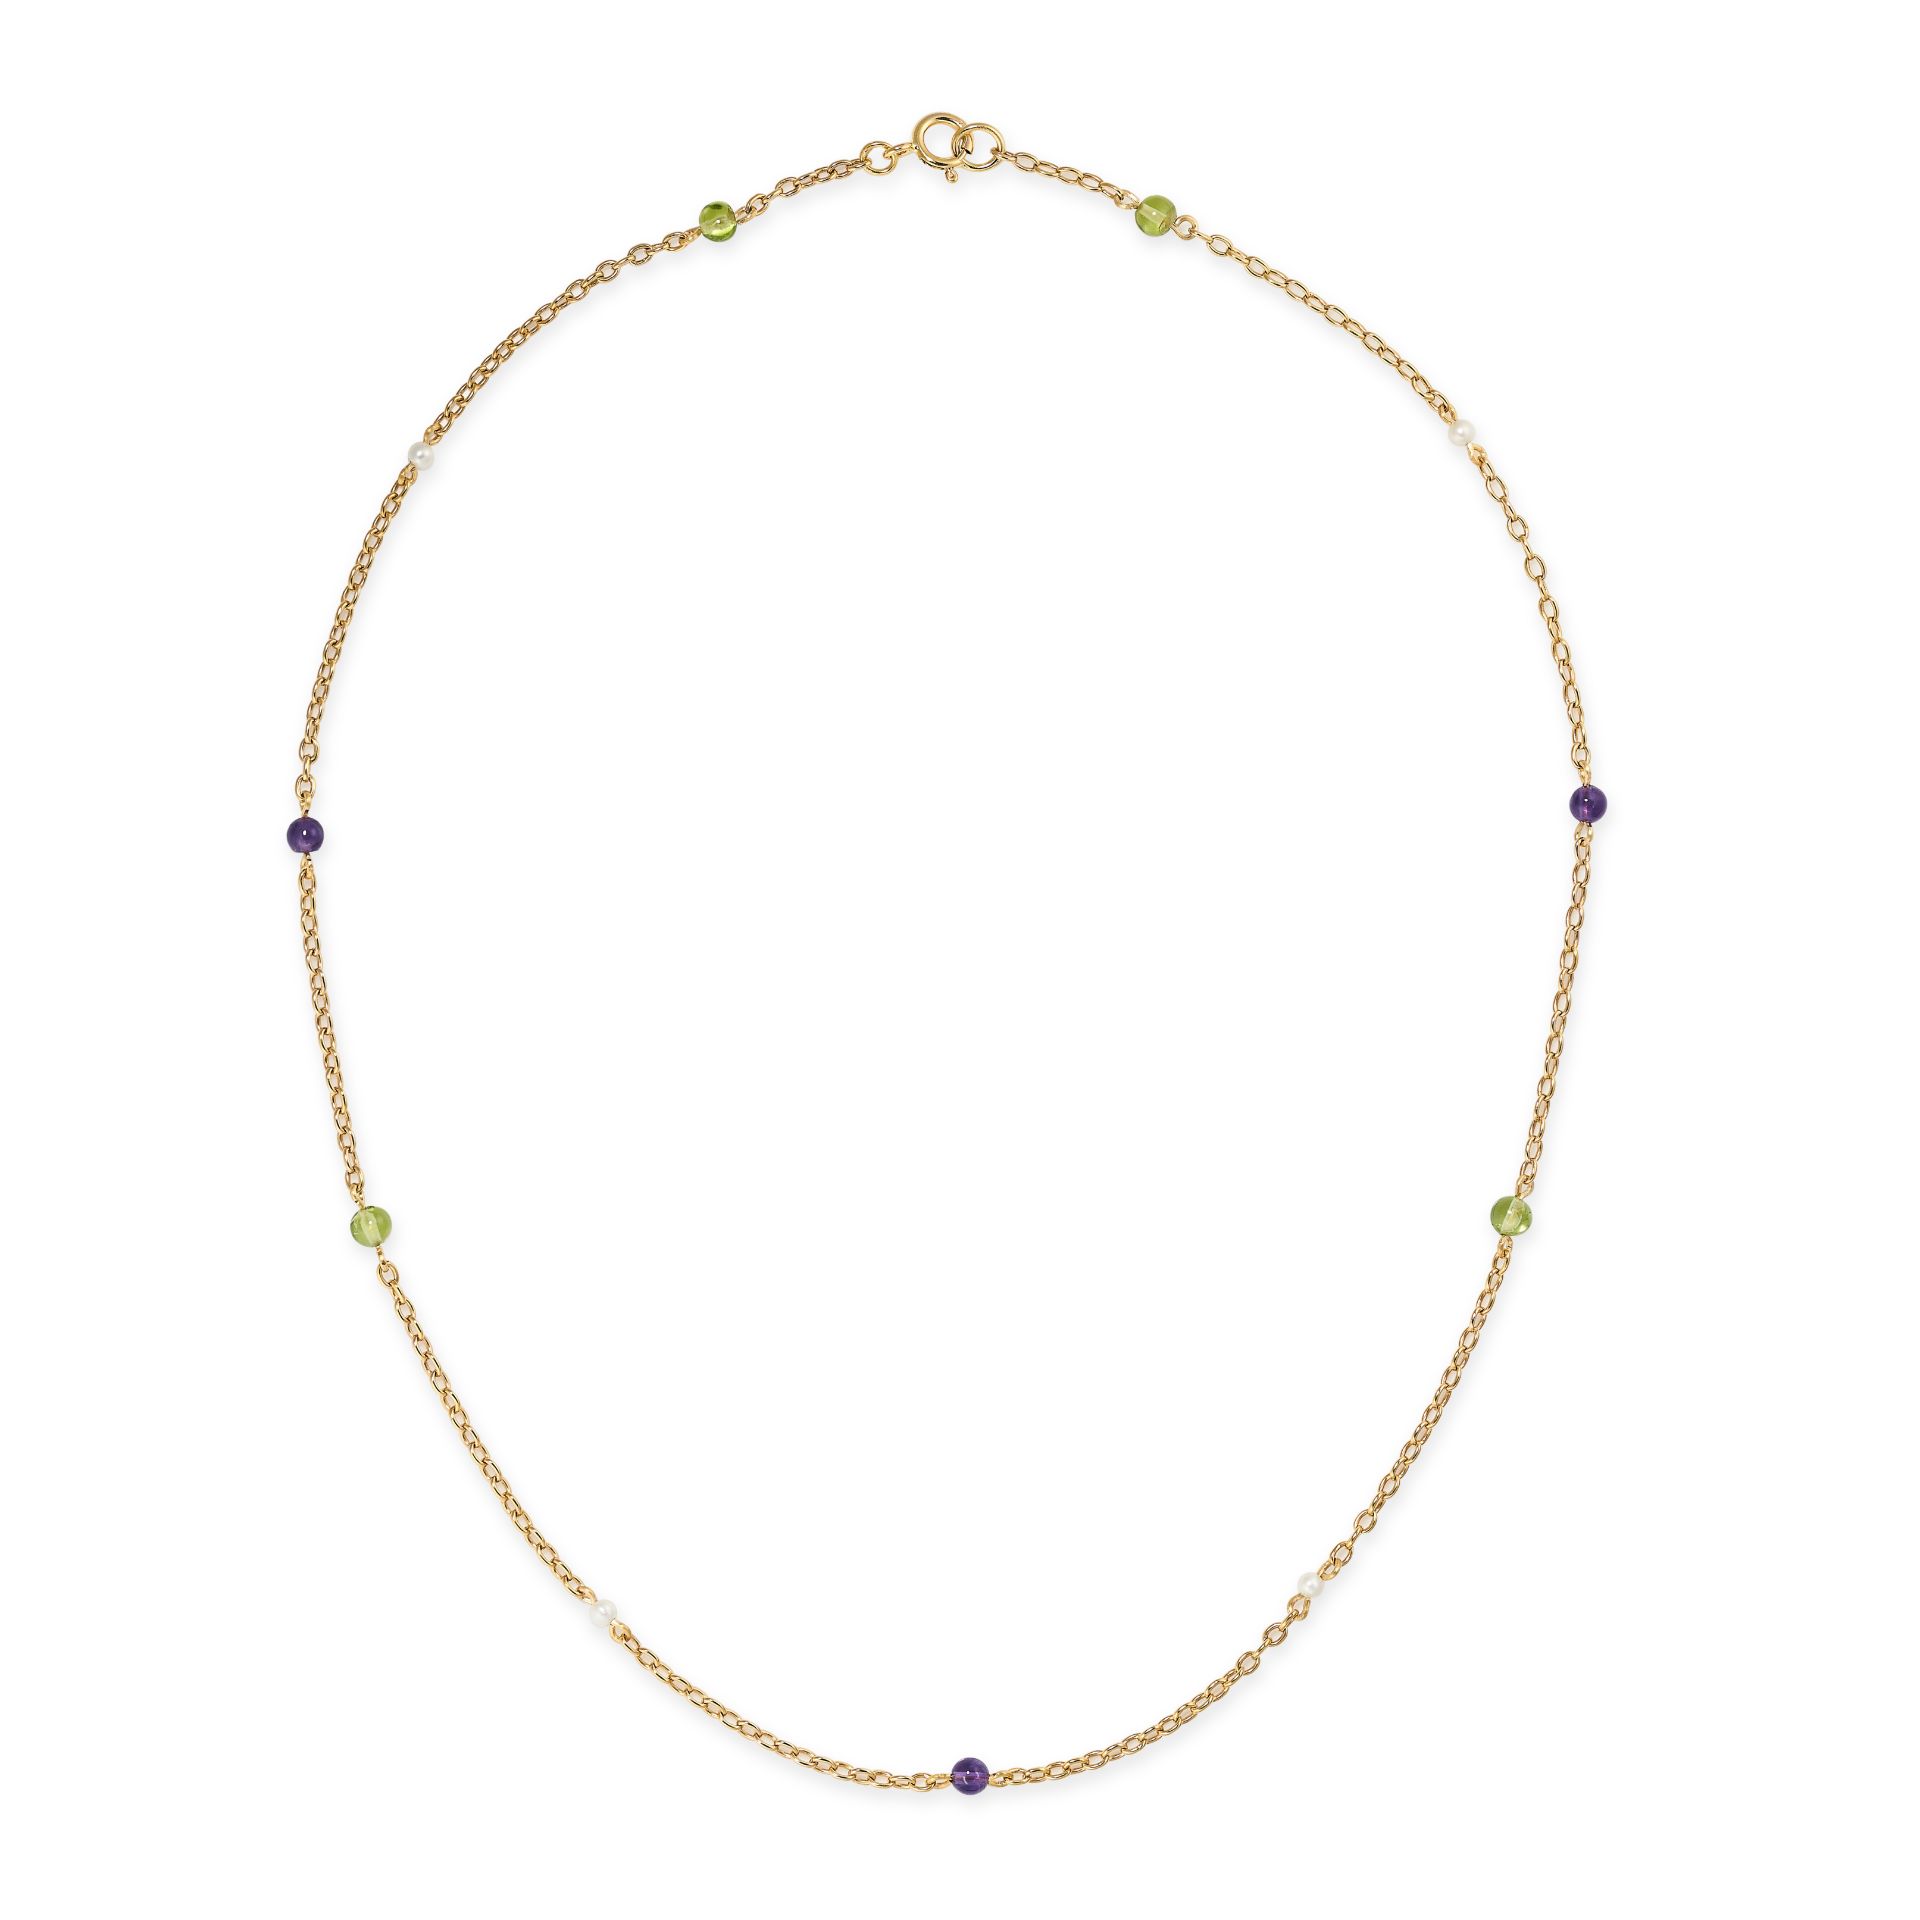 NO RESERVE - AN ANTIQUE AMETHYST, PERIDOT AND PEARL CHAIN NECKLACE in 18ct yellow gold, the trace